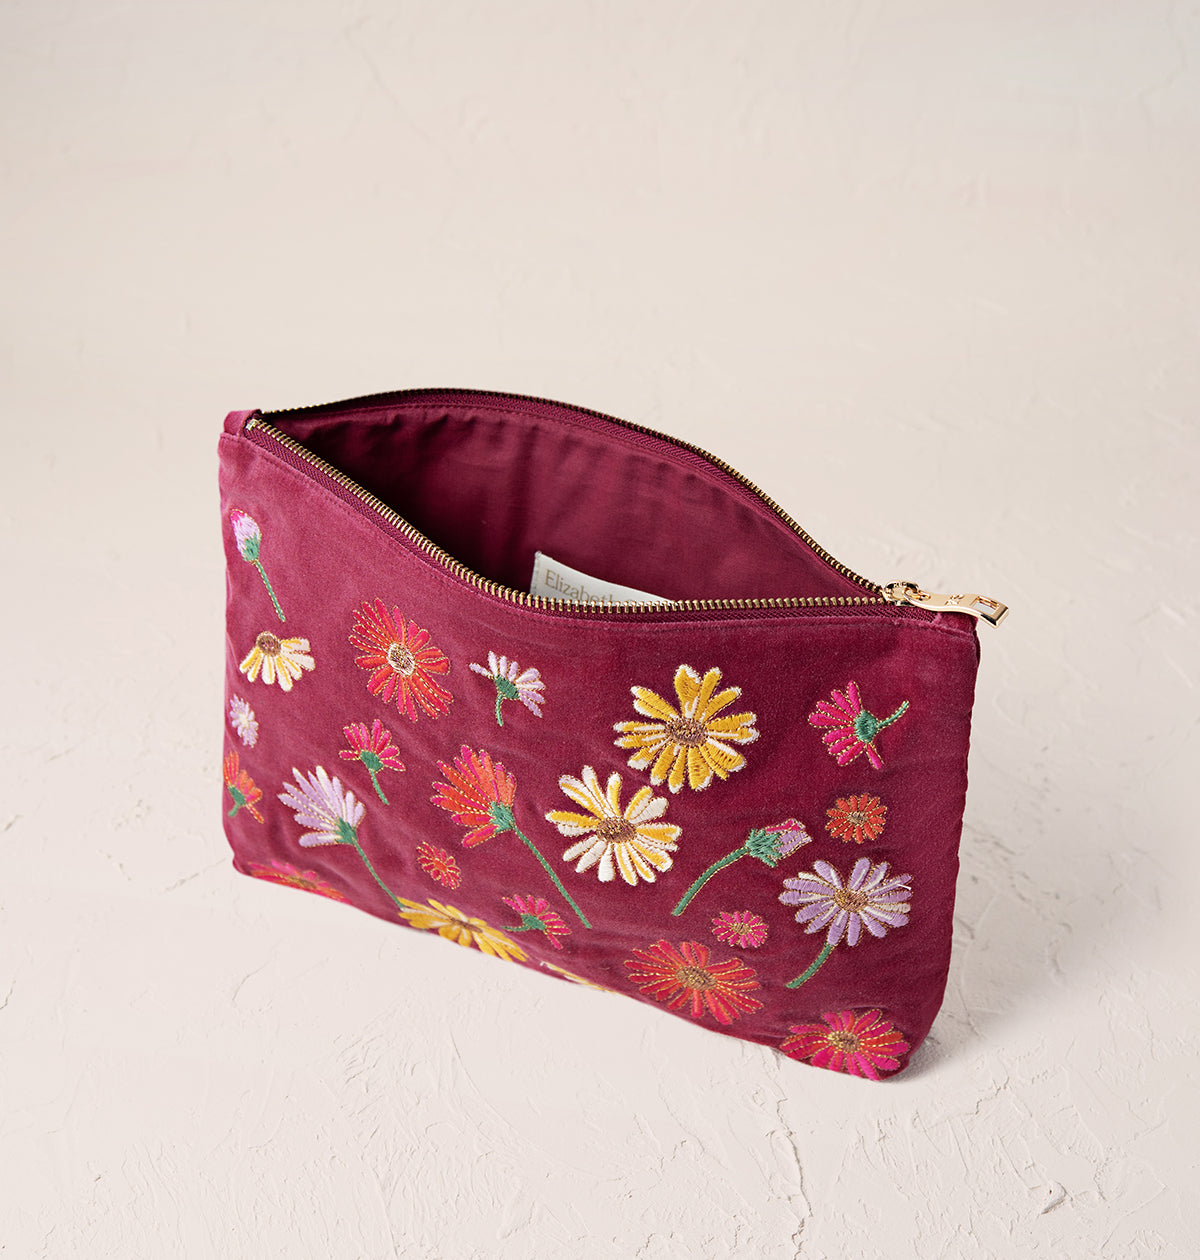 Wildflower Everyday Pouch in Dry Rose